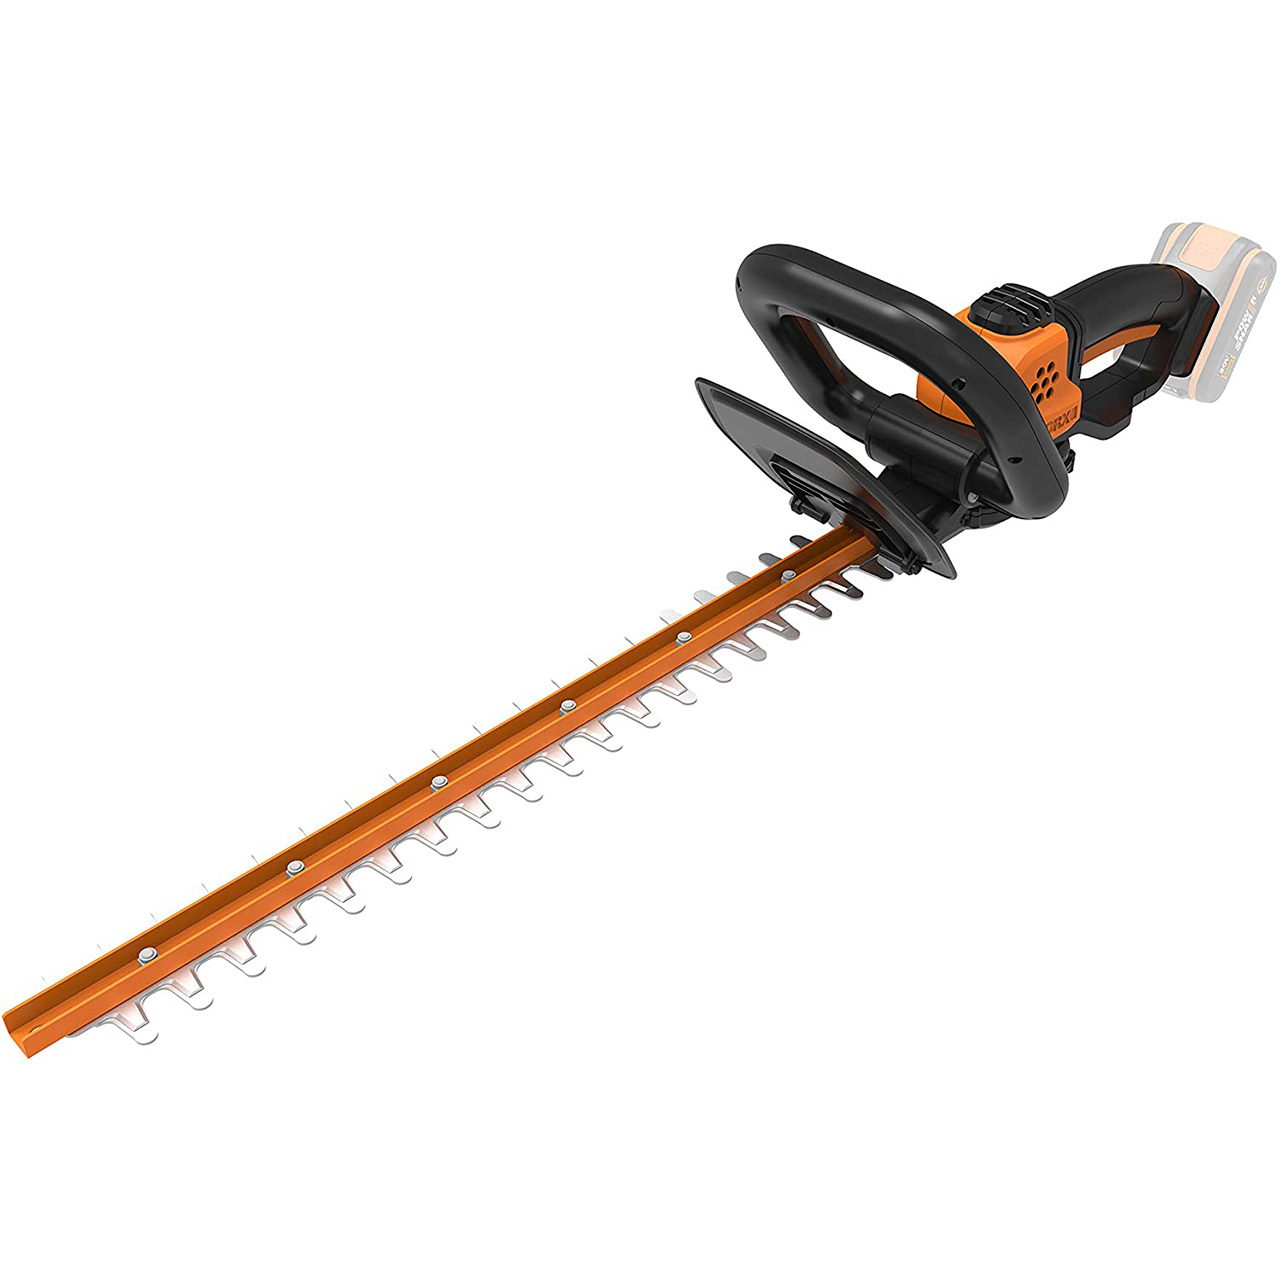 WORX 20V Cordless Hedge Trimmer Skin (POWERSHARE Battery Charger not incl.)  - WG261E.9